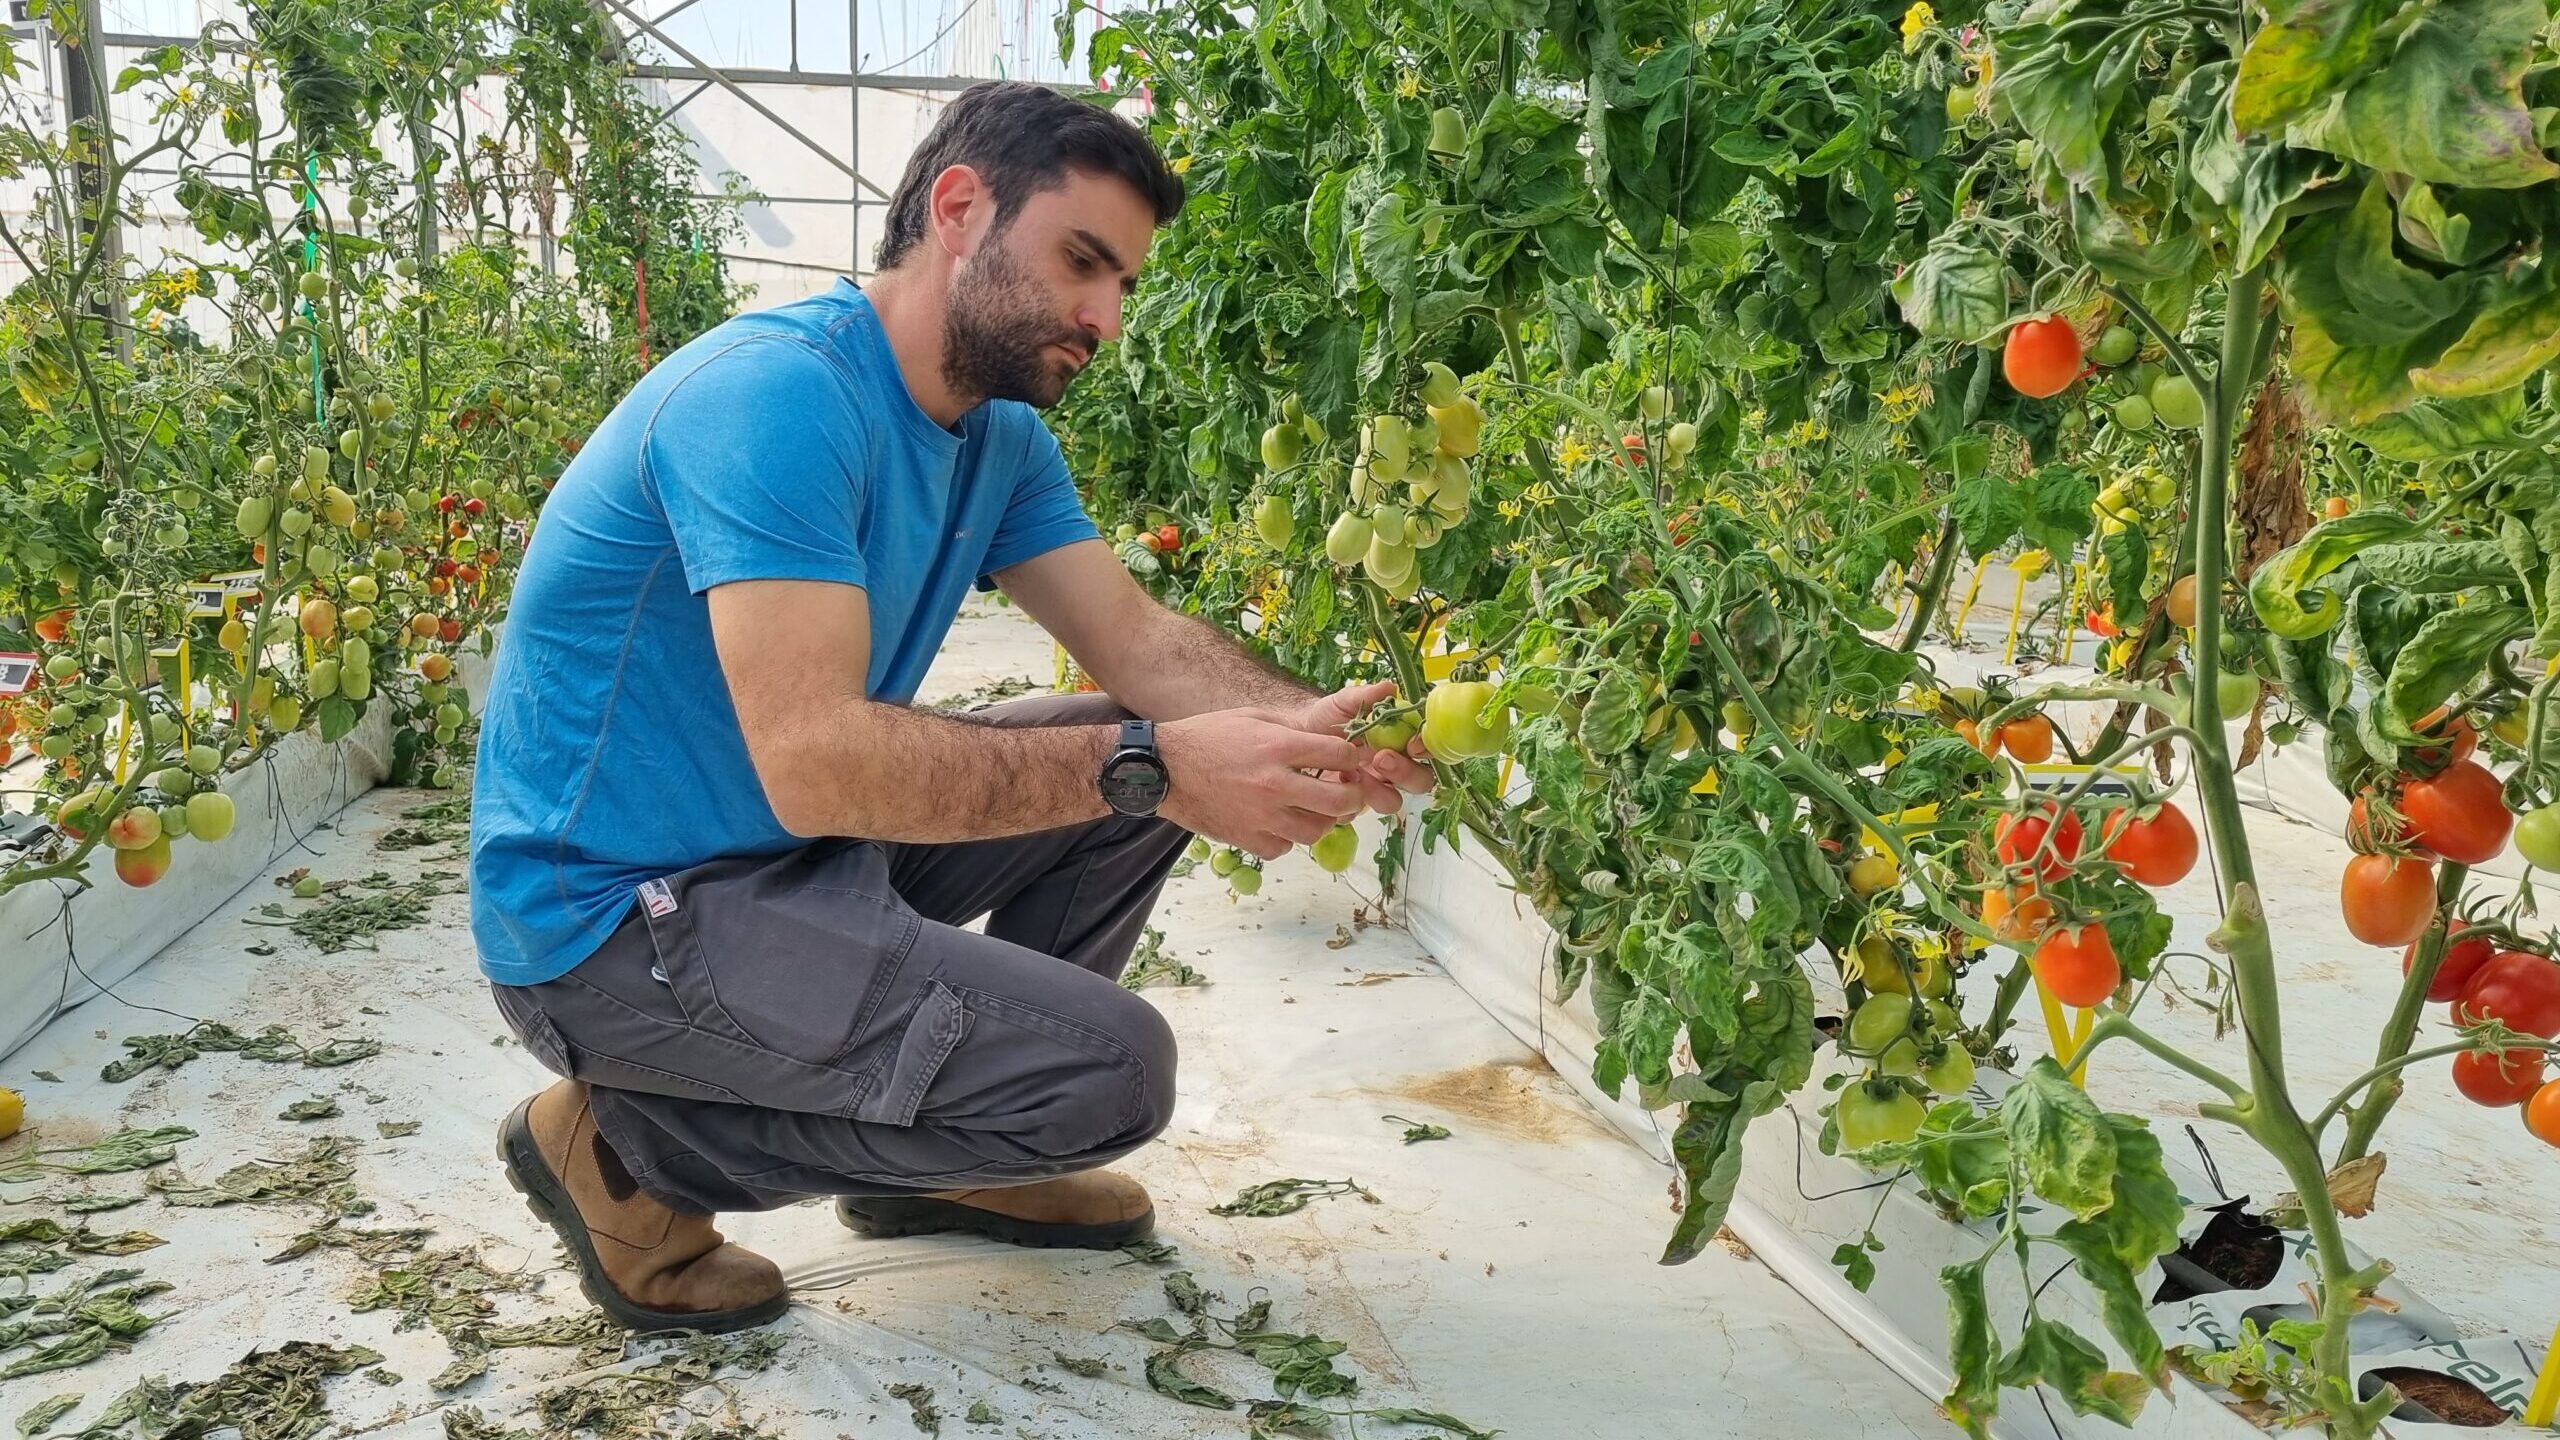 Israeli Scientists Develop Drought-Resistant Tomatoes To Combat Climate Change Impact